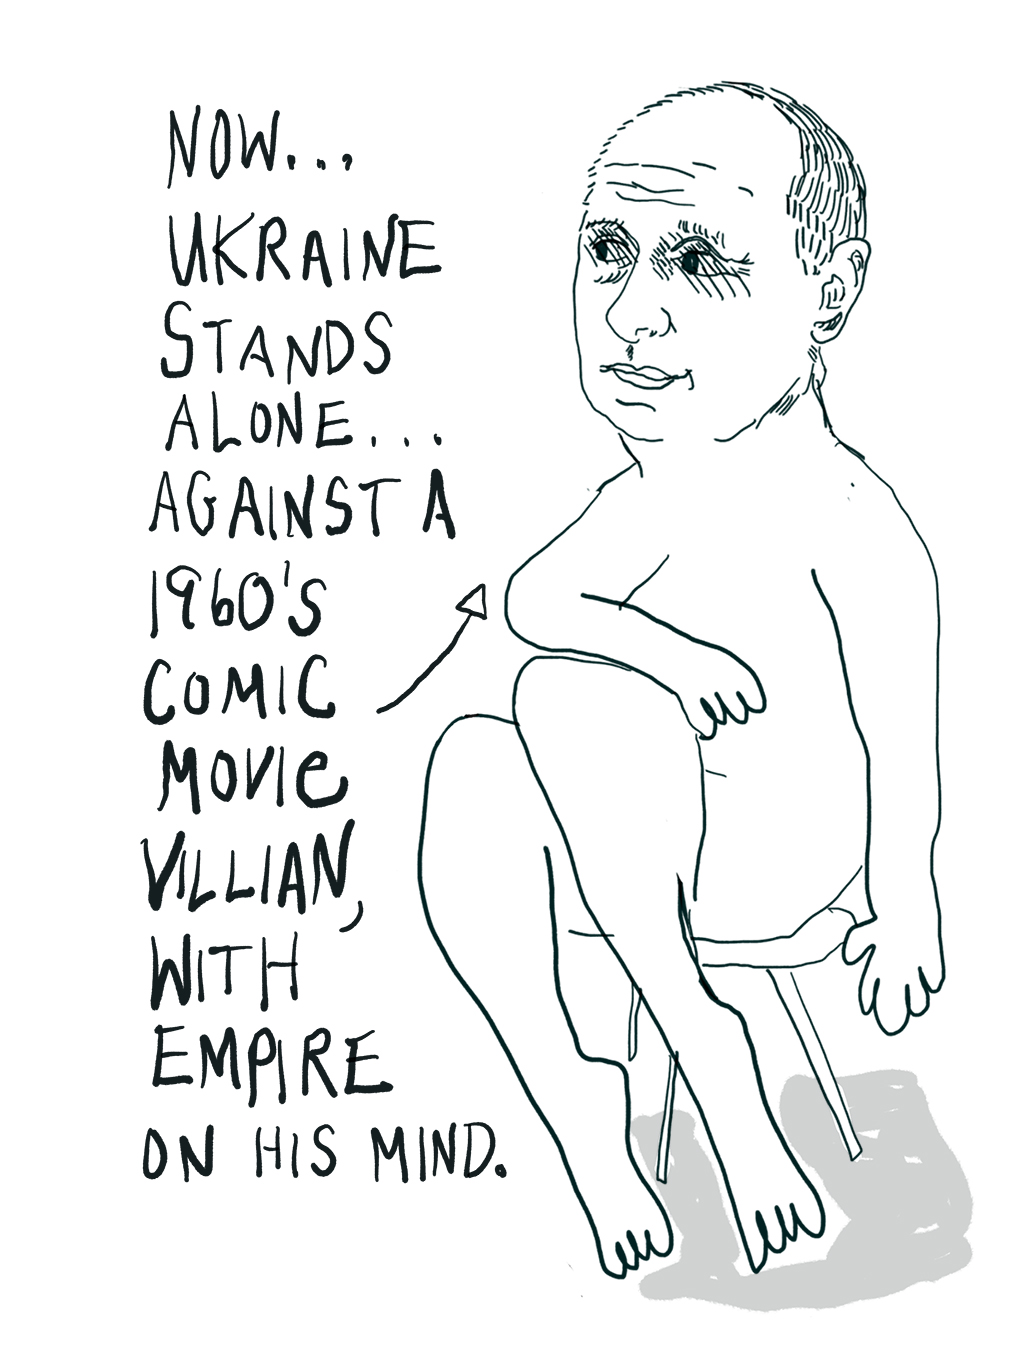 Black and white drawing of Putin sitting on a stool naked with legs crossed demurely: Now… Ukraine stands alone against a 1960’s comic movie villain with Empire on his mind.